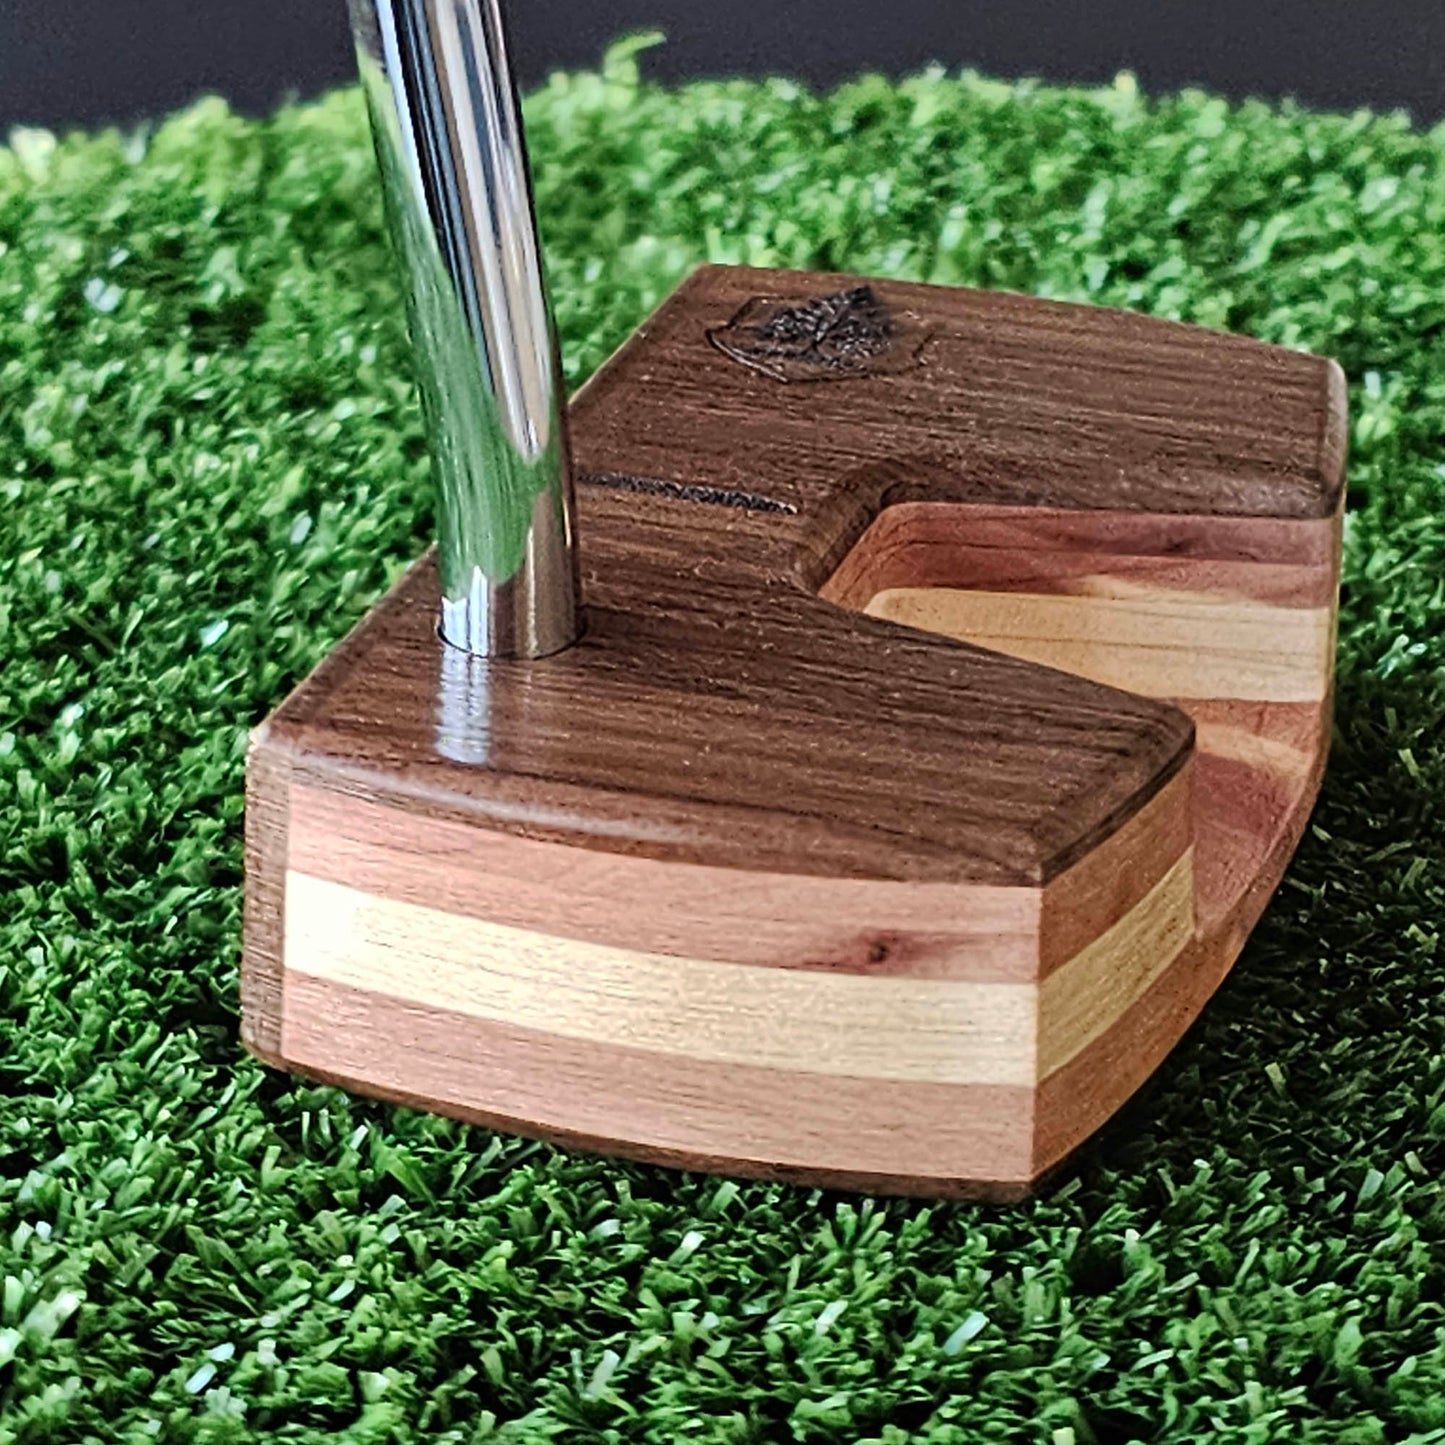 Bolivian Rosewood Red Cedar and Maple Woodrich Regal wood putter